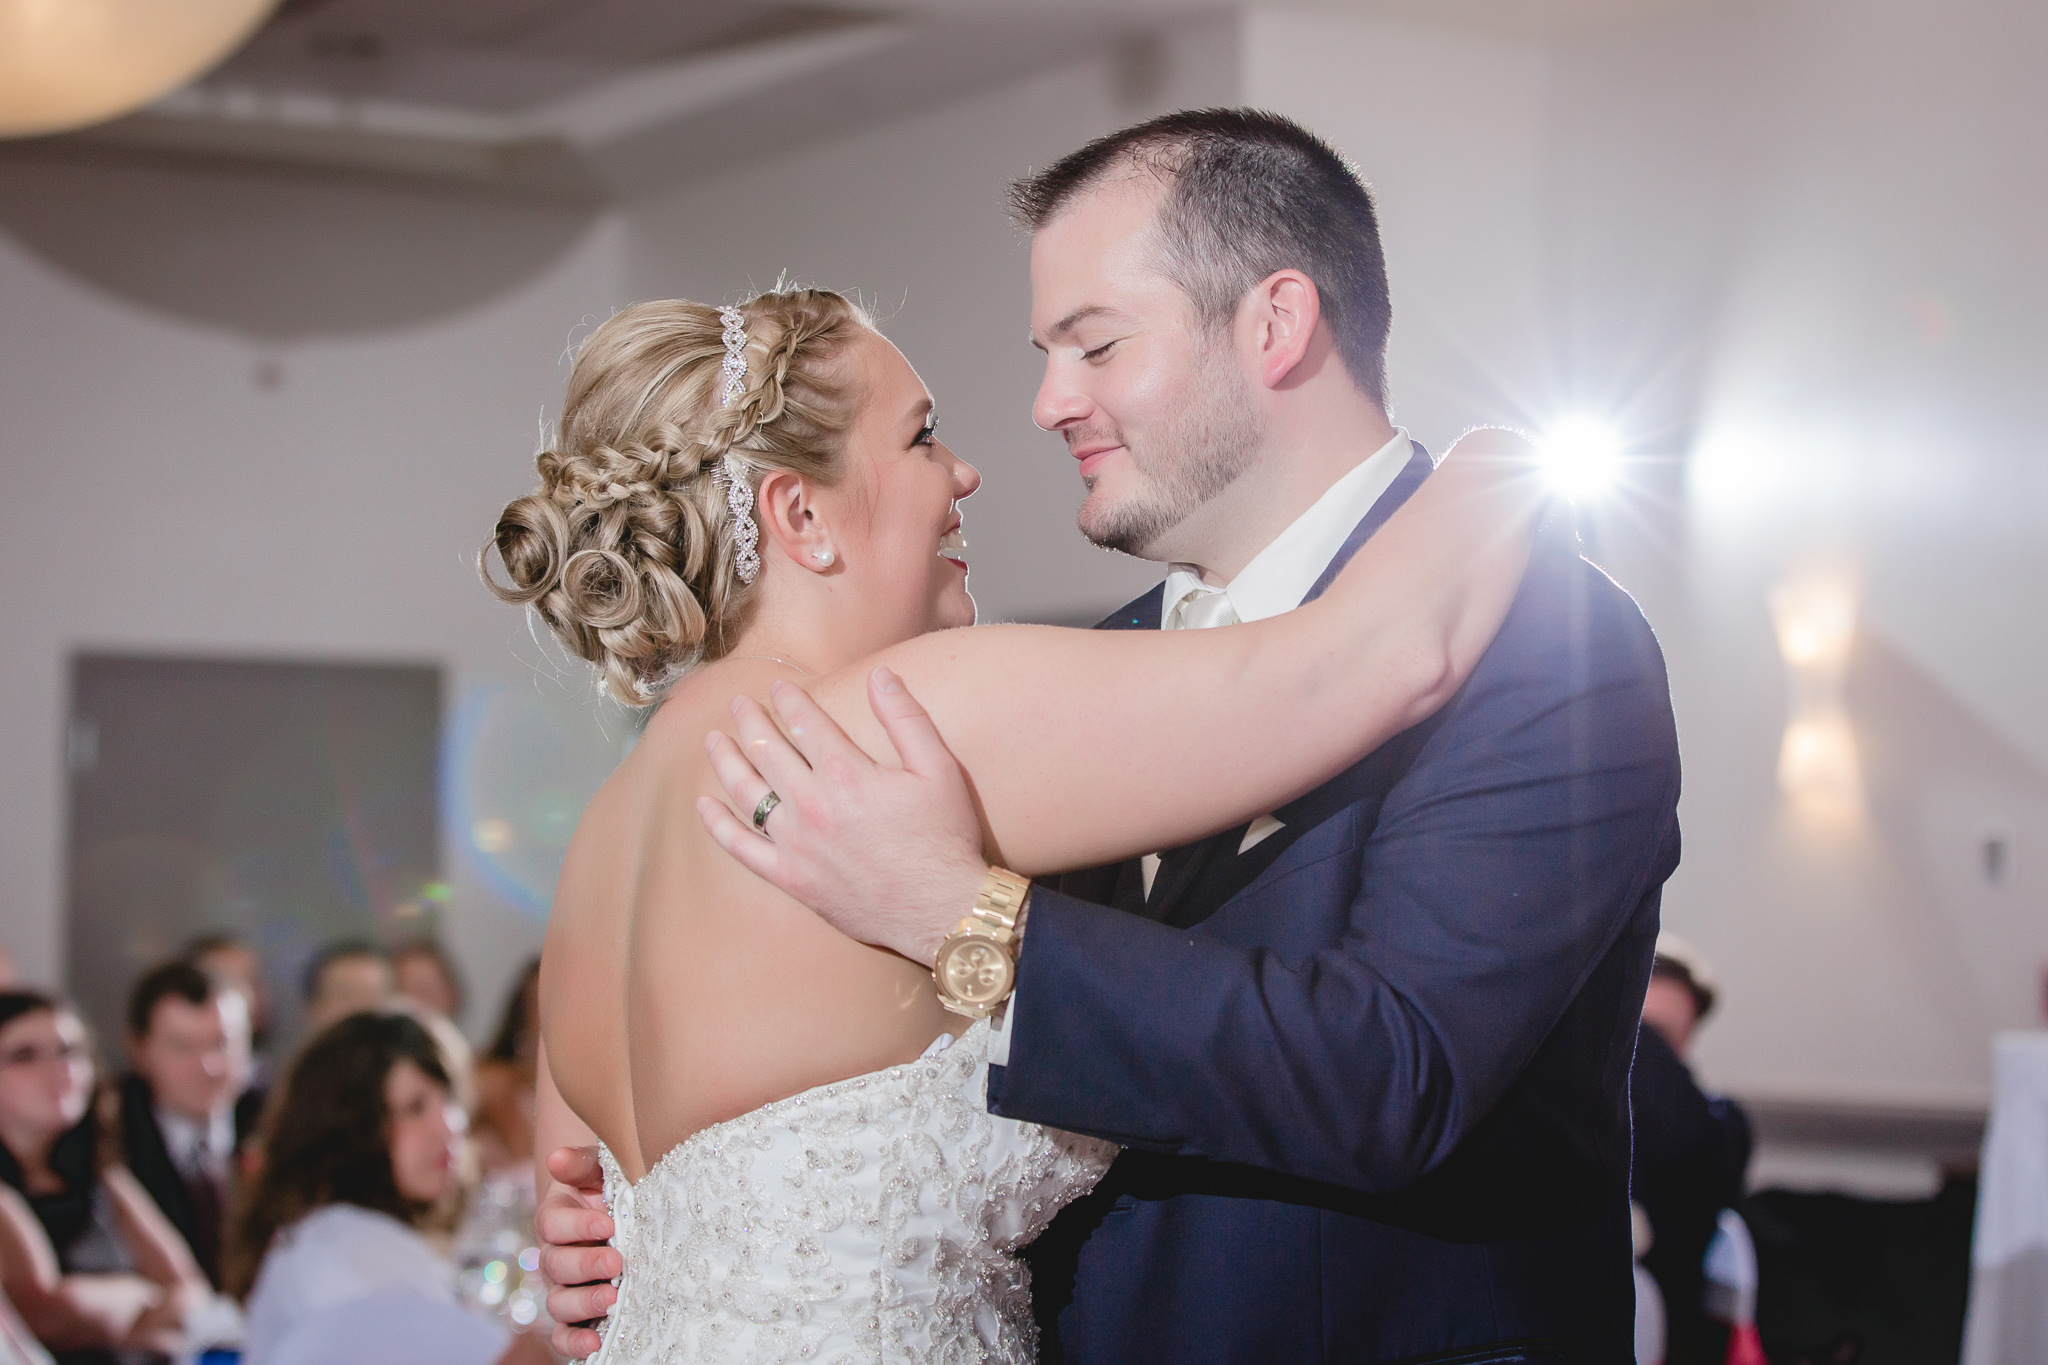 Bride and groom's first dance at their Pittsburgh Airport Marriott wedding reception